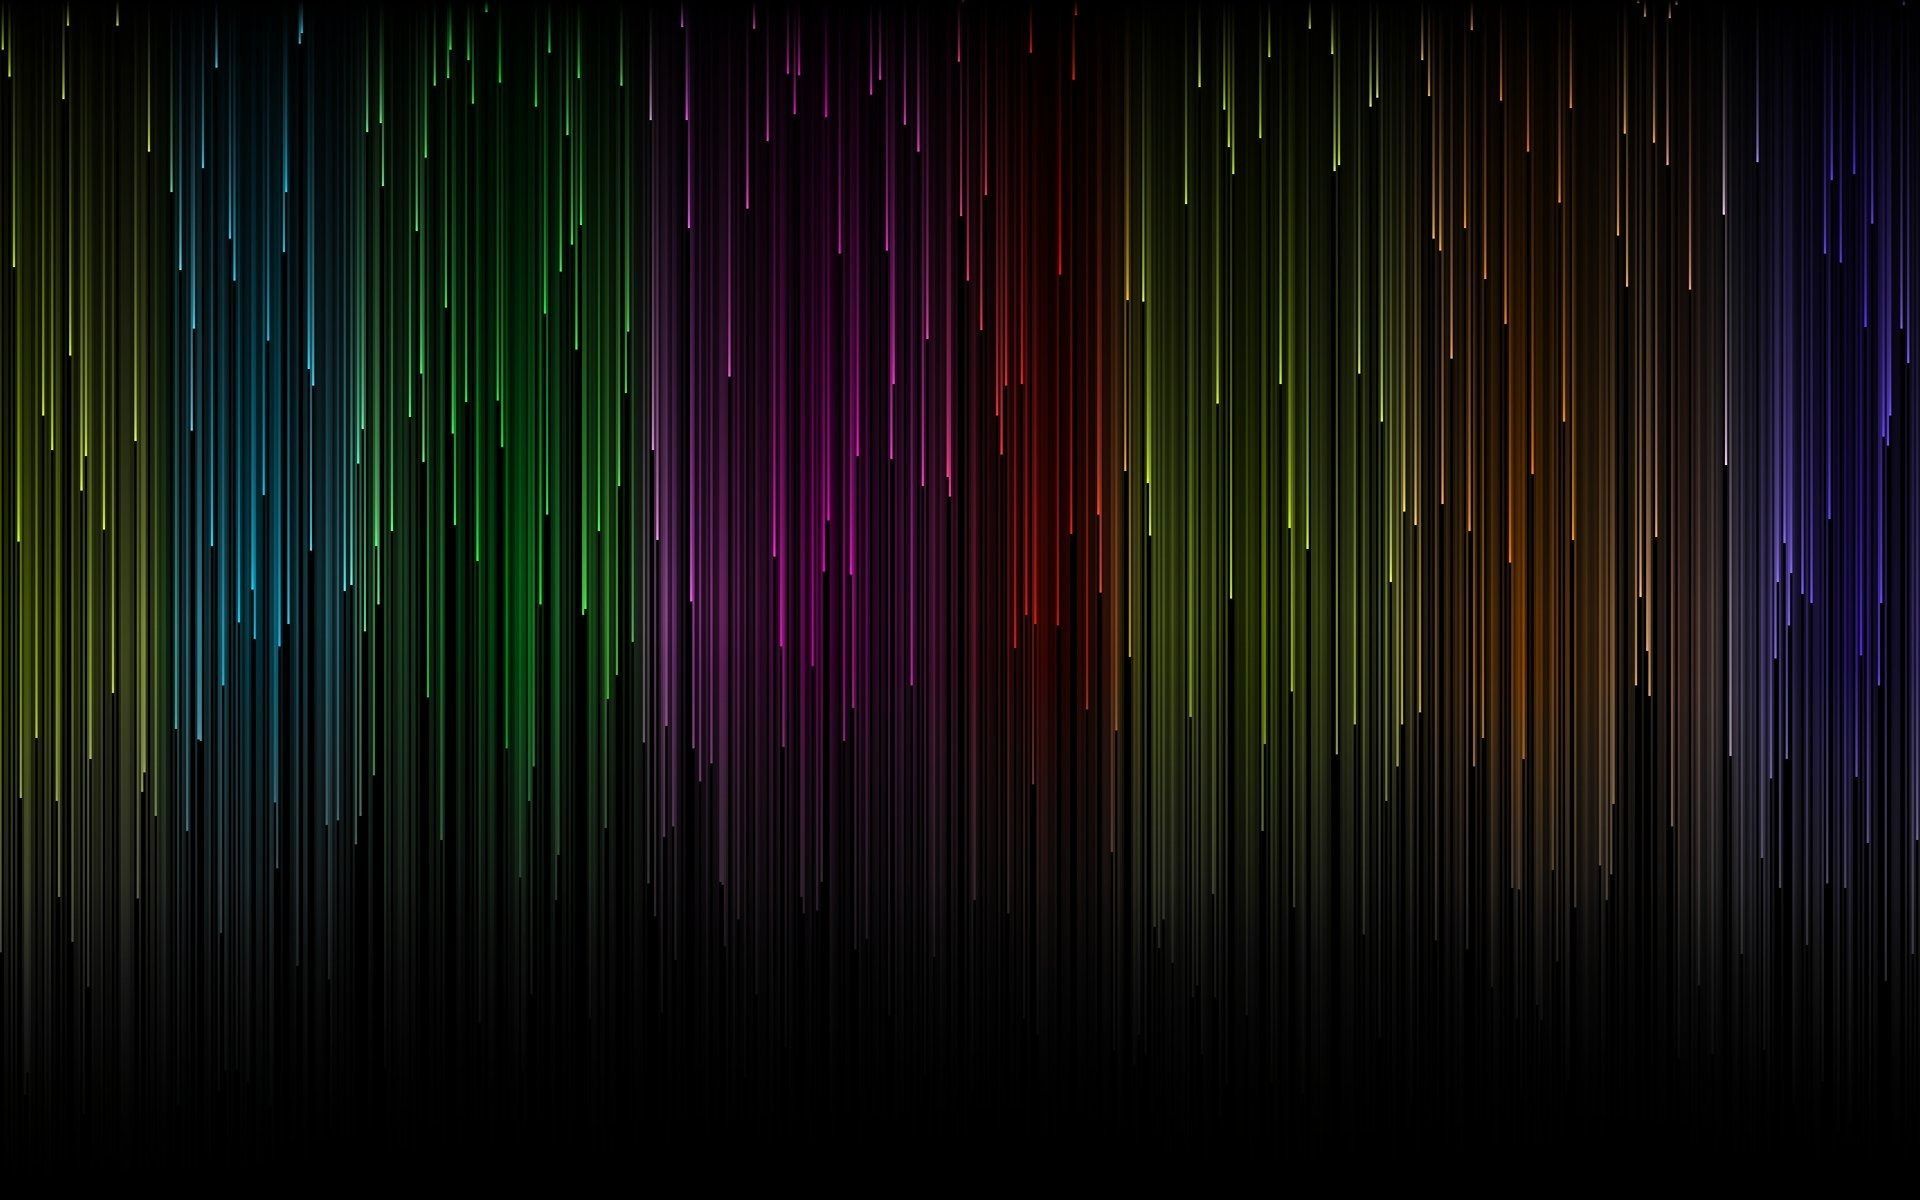 Colorful Black Backgrounds wallpaper | 1920x1200 | #10138